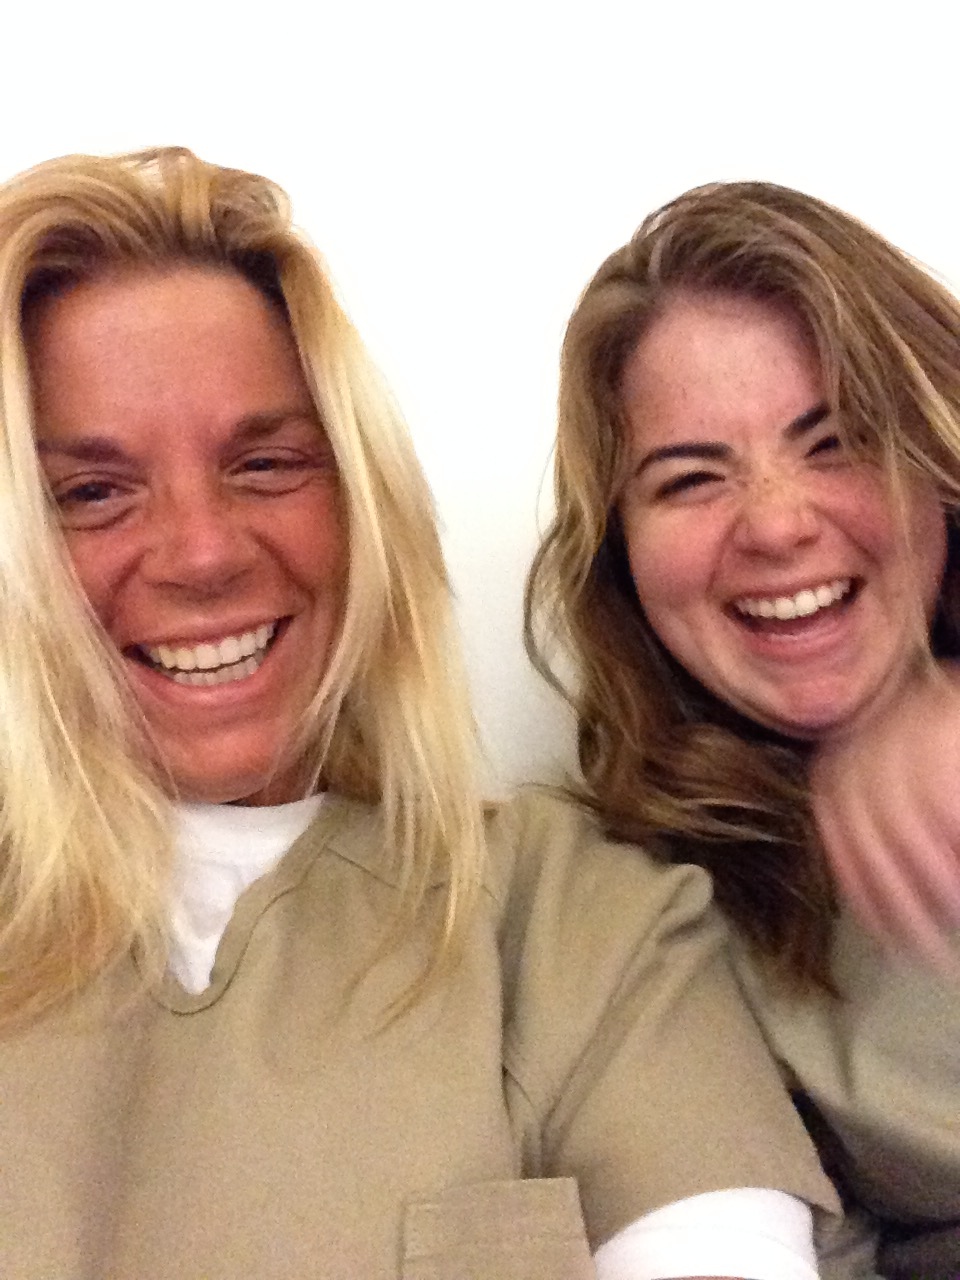 Who says you can't be happy in prison. OITNB